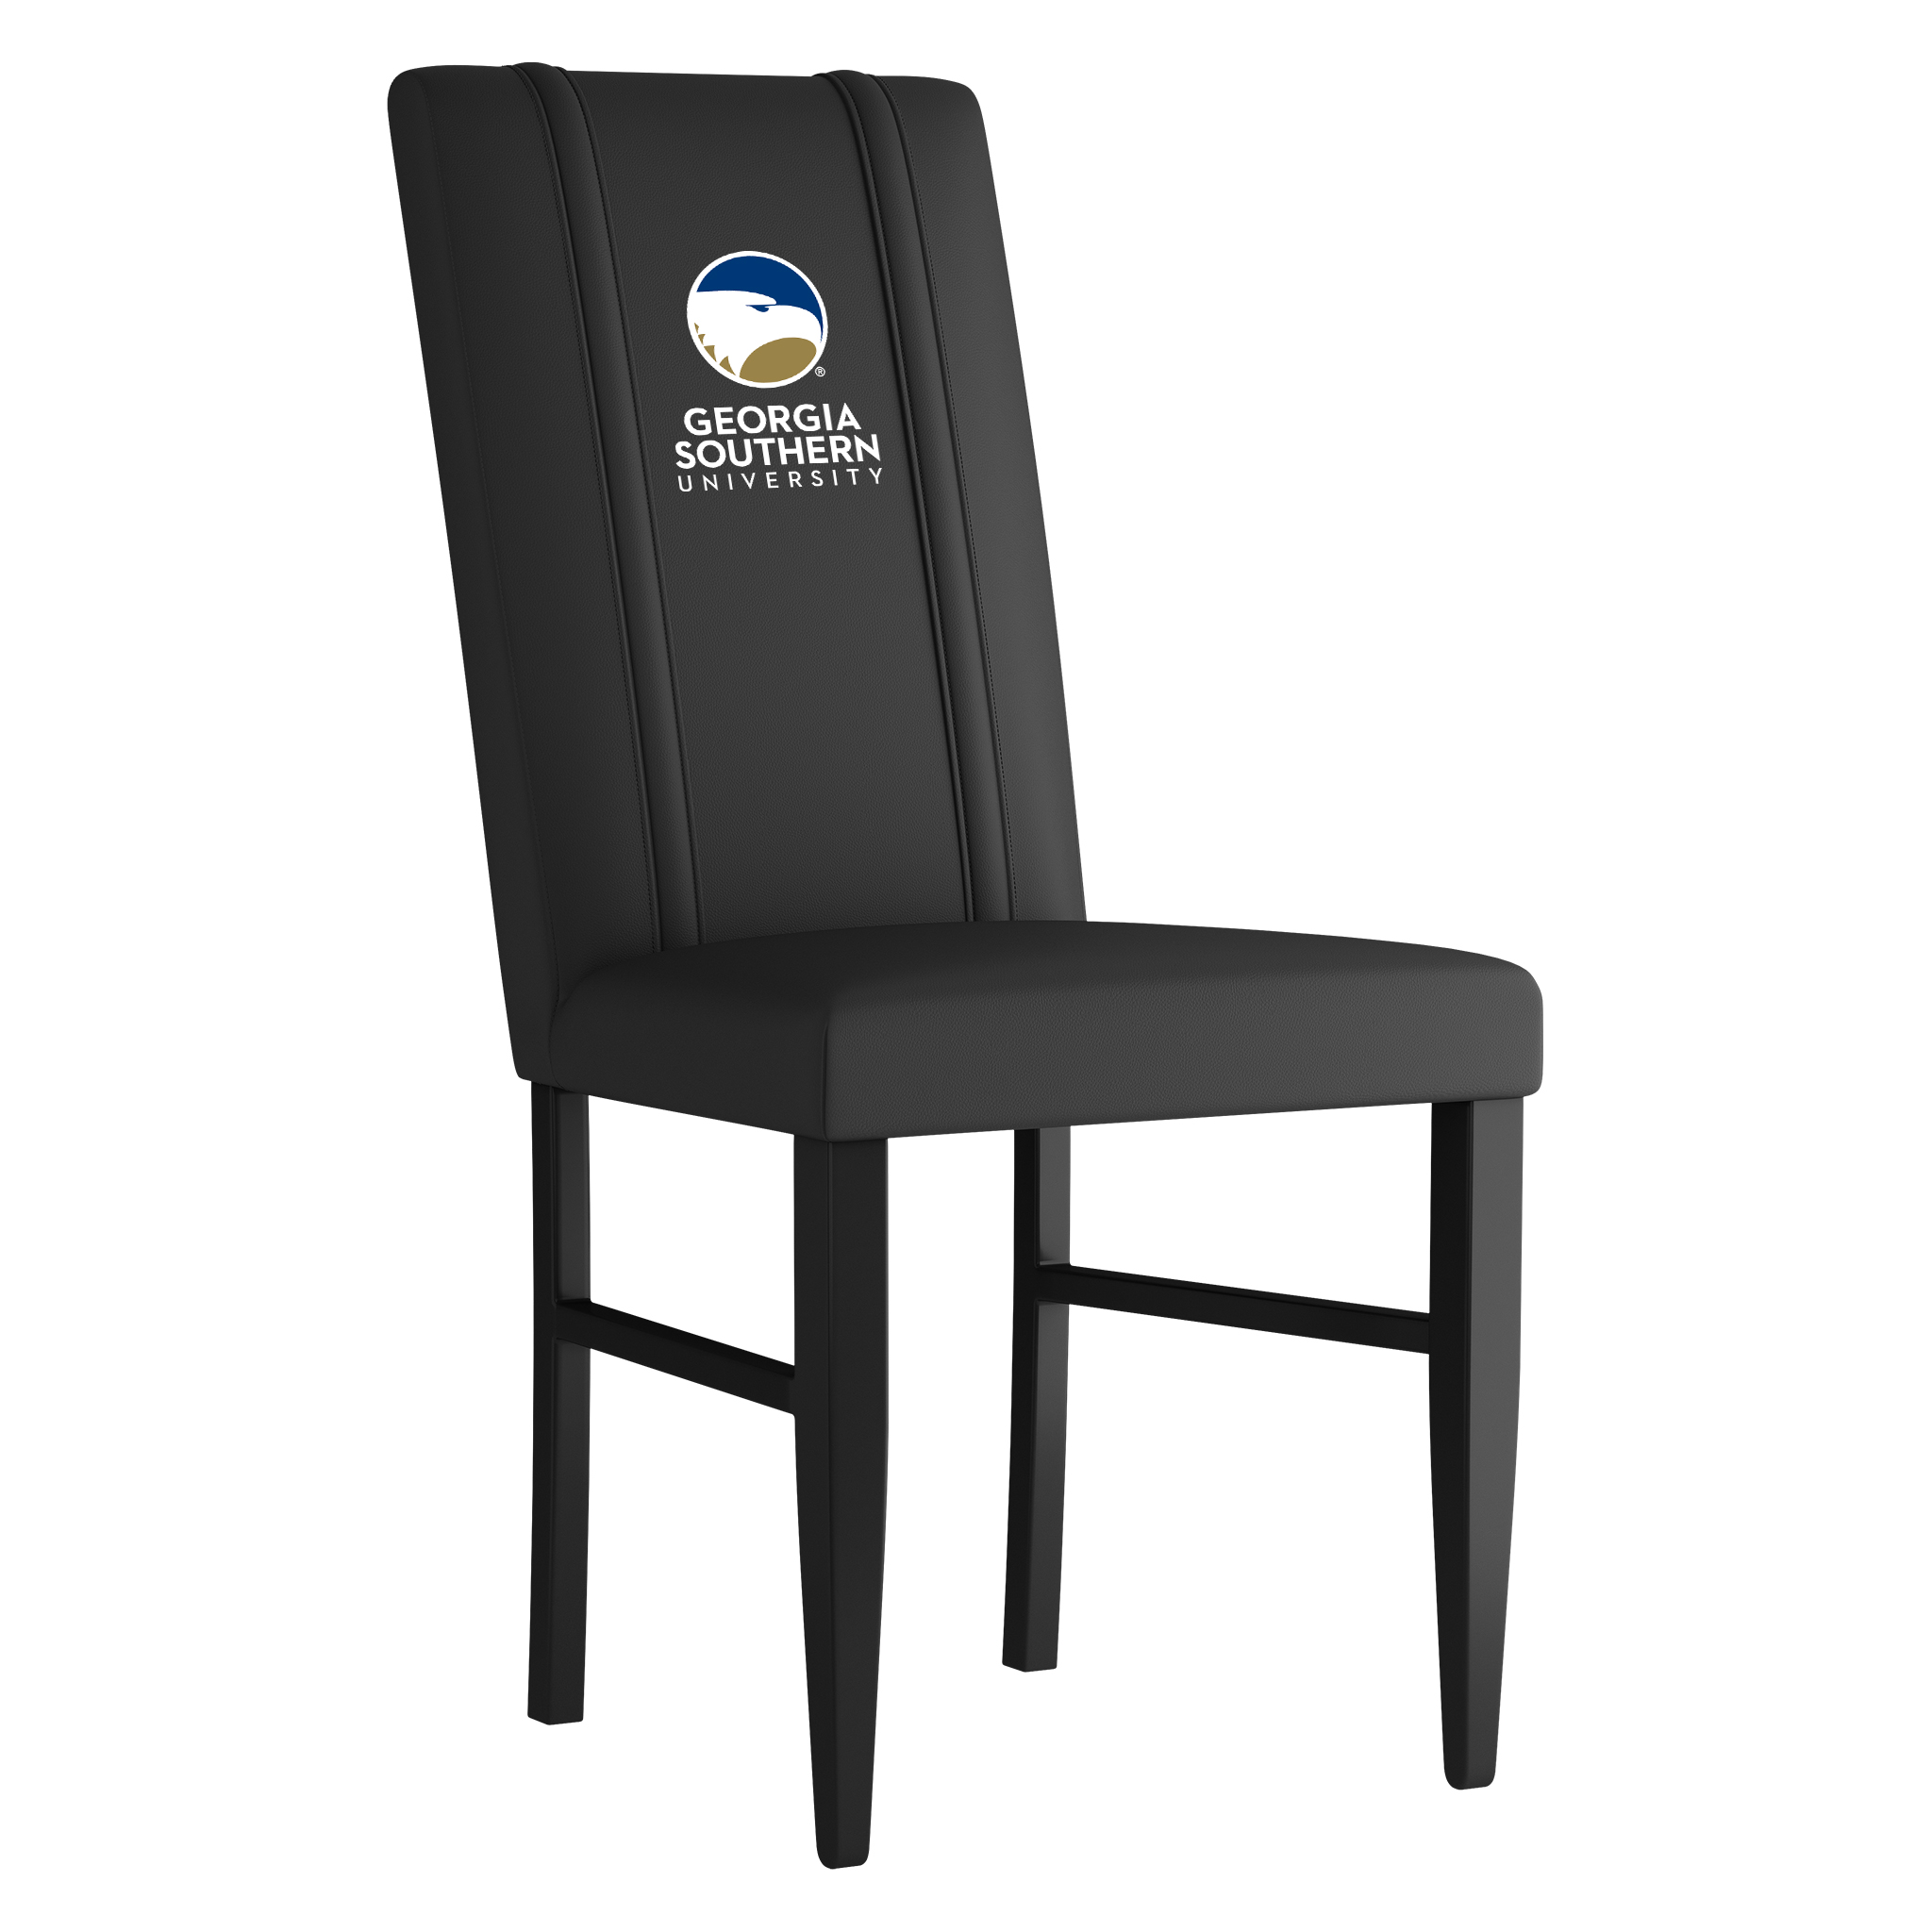 Georgia Southern University Side Chair 2000 With Georgia Southern University Logo